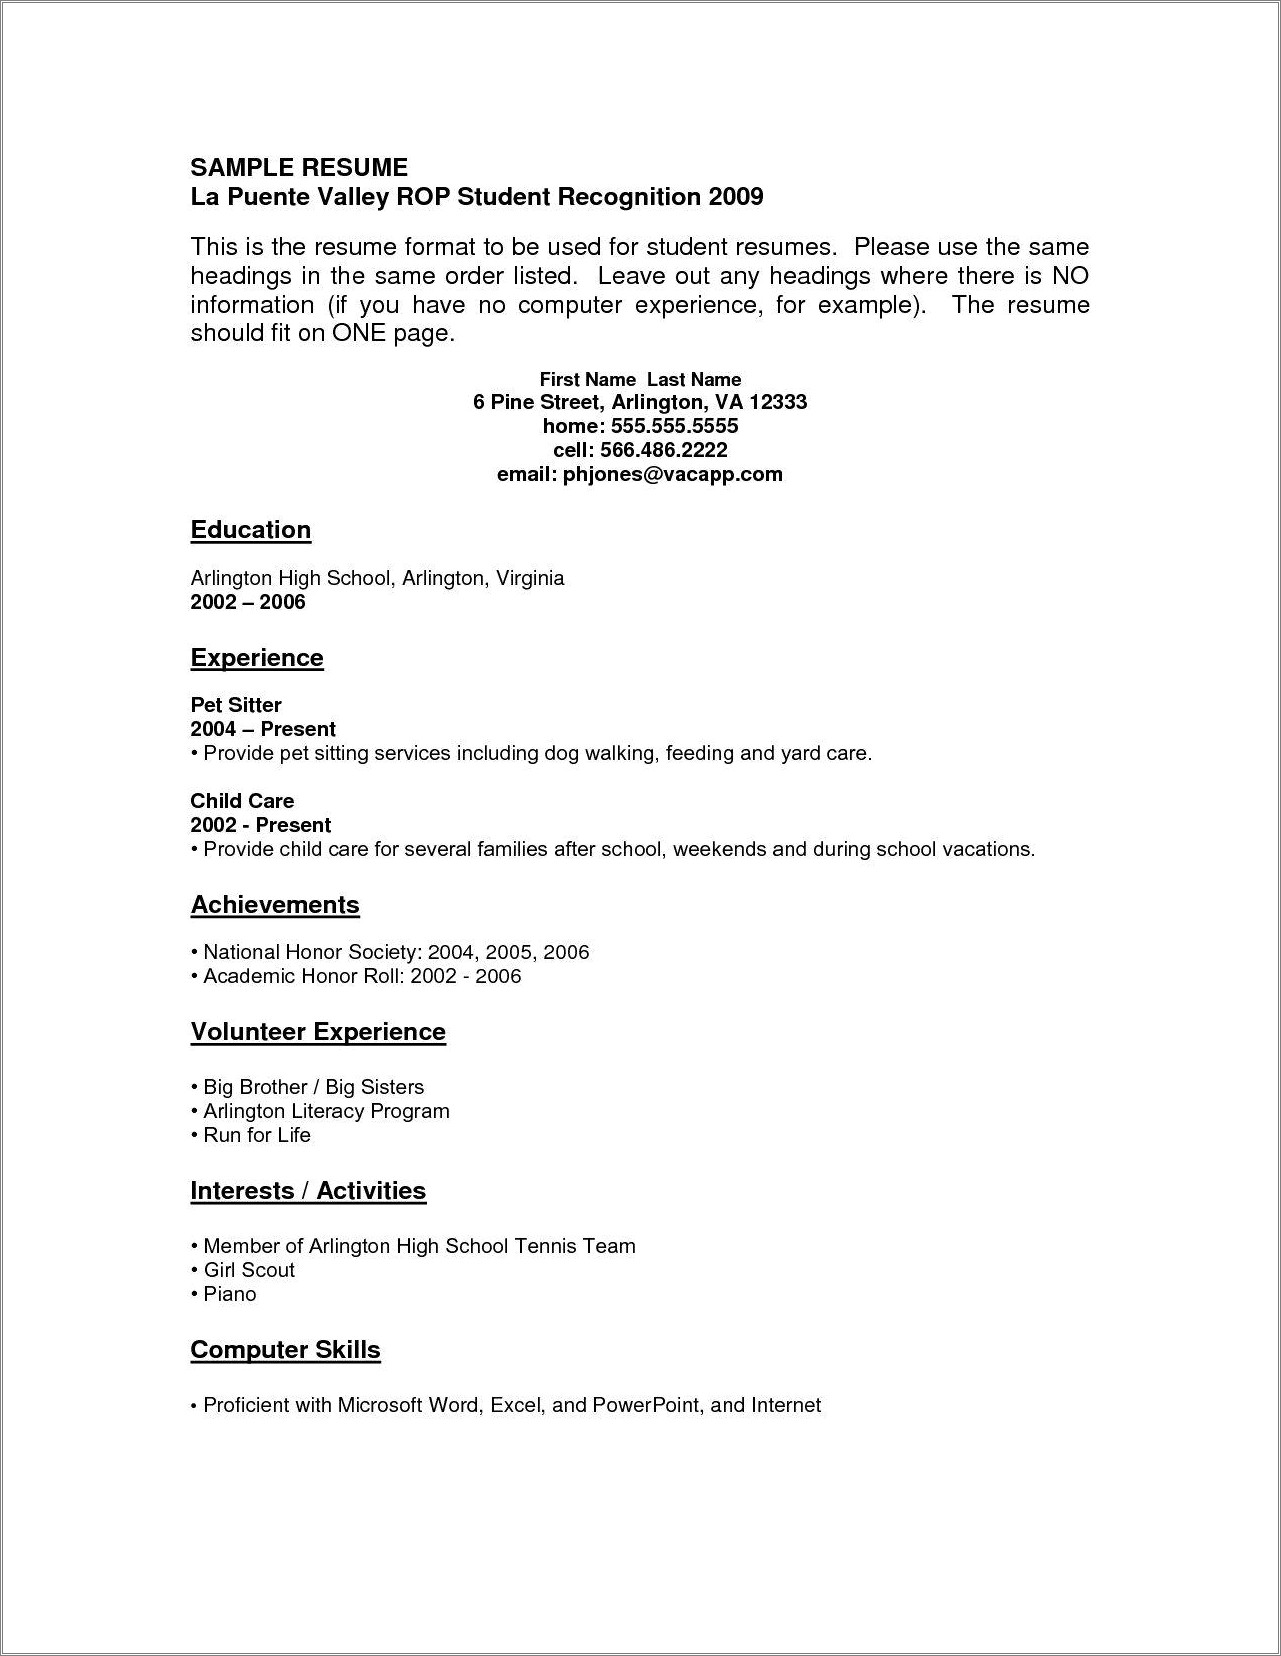 Resume For Someone With No Related Experience